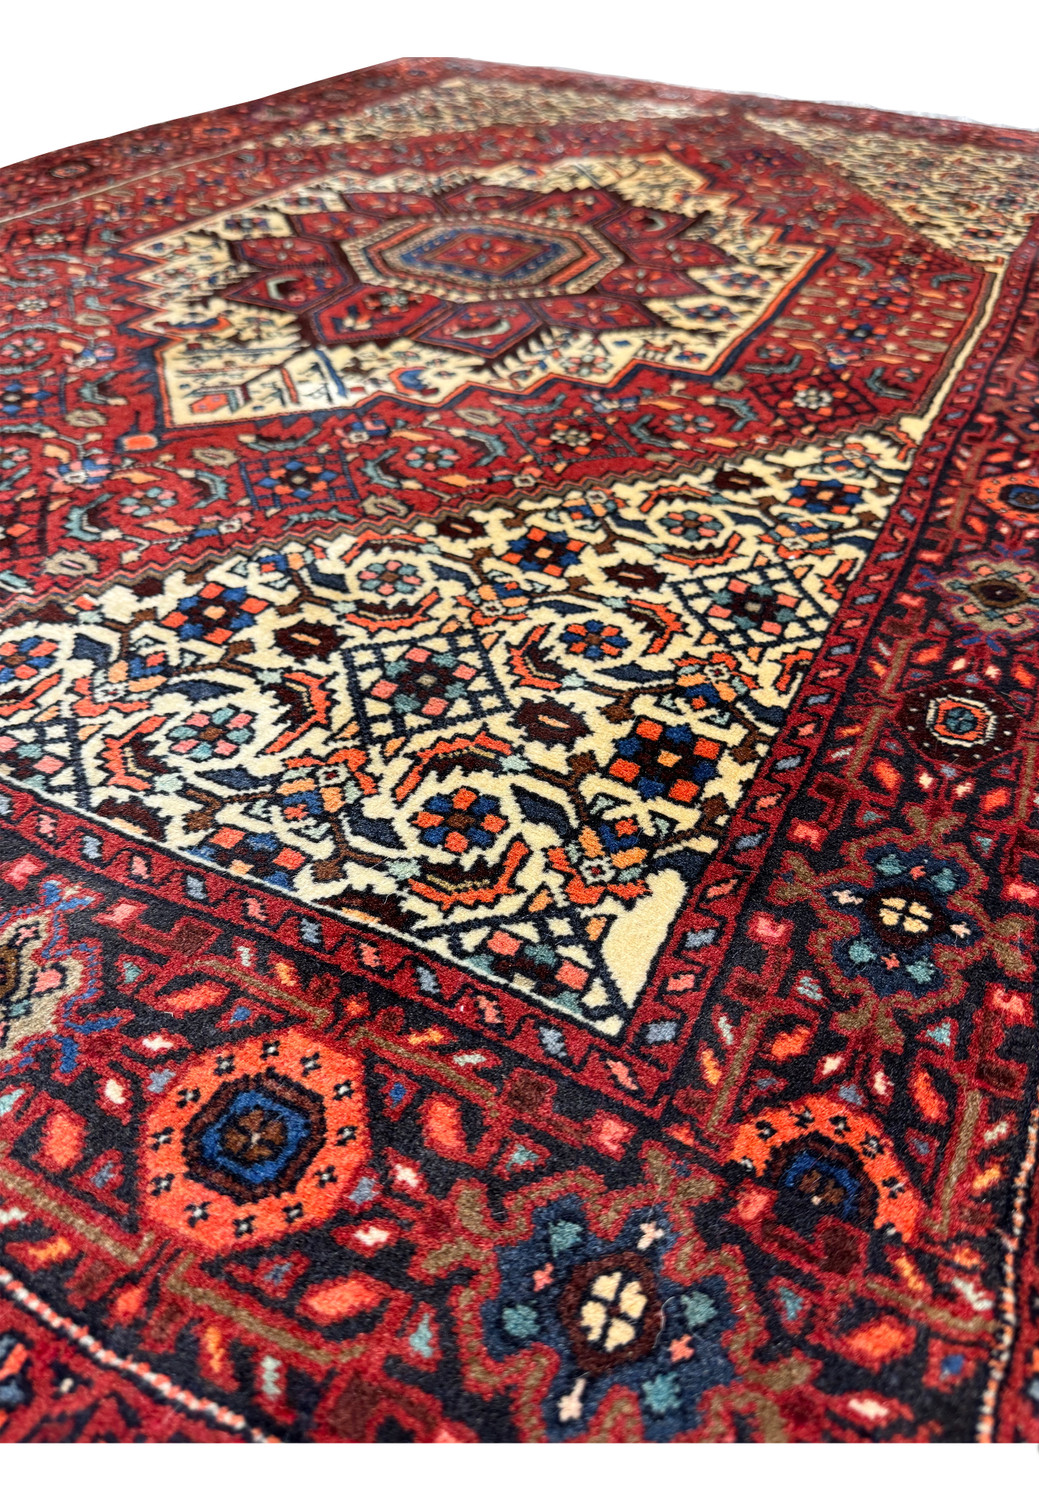 Angle shot highlighting the plush pile and vivid colors of the Persian Gholtogh rug